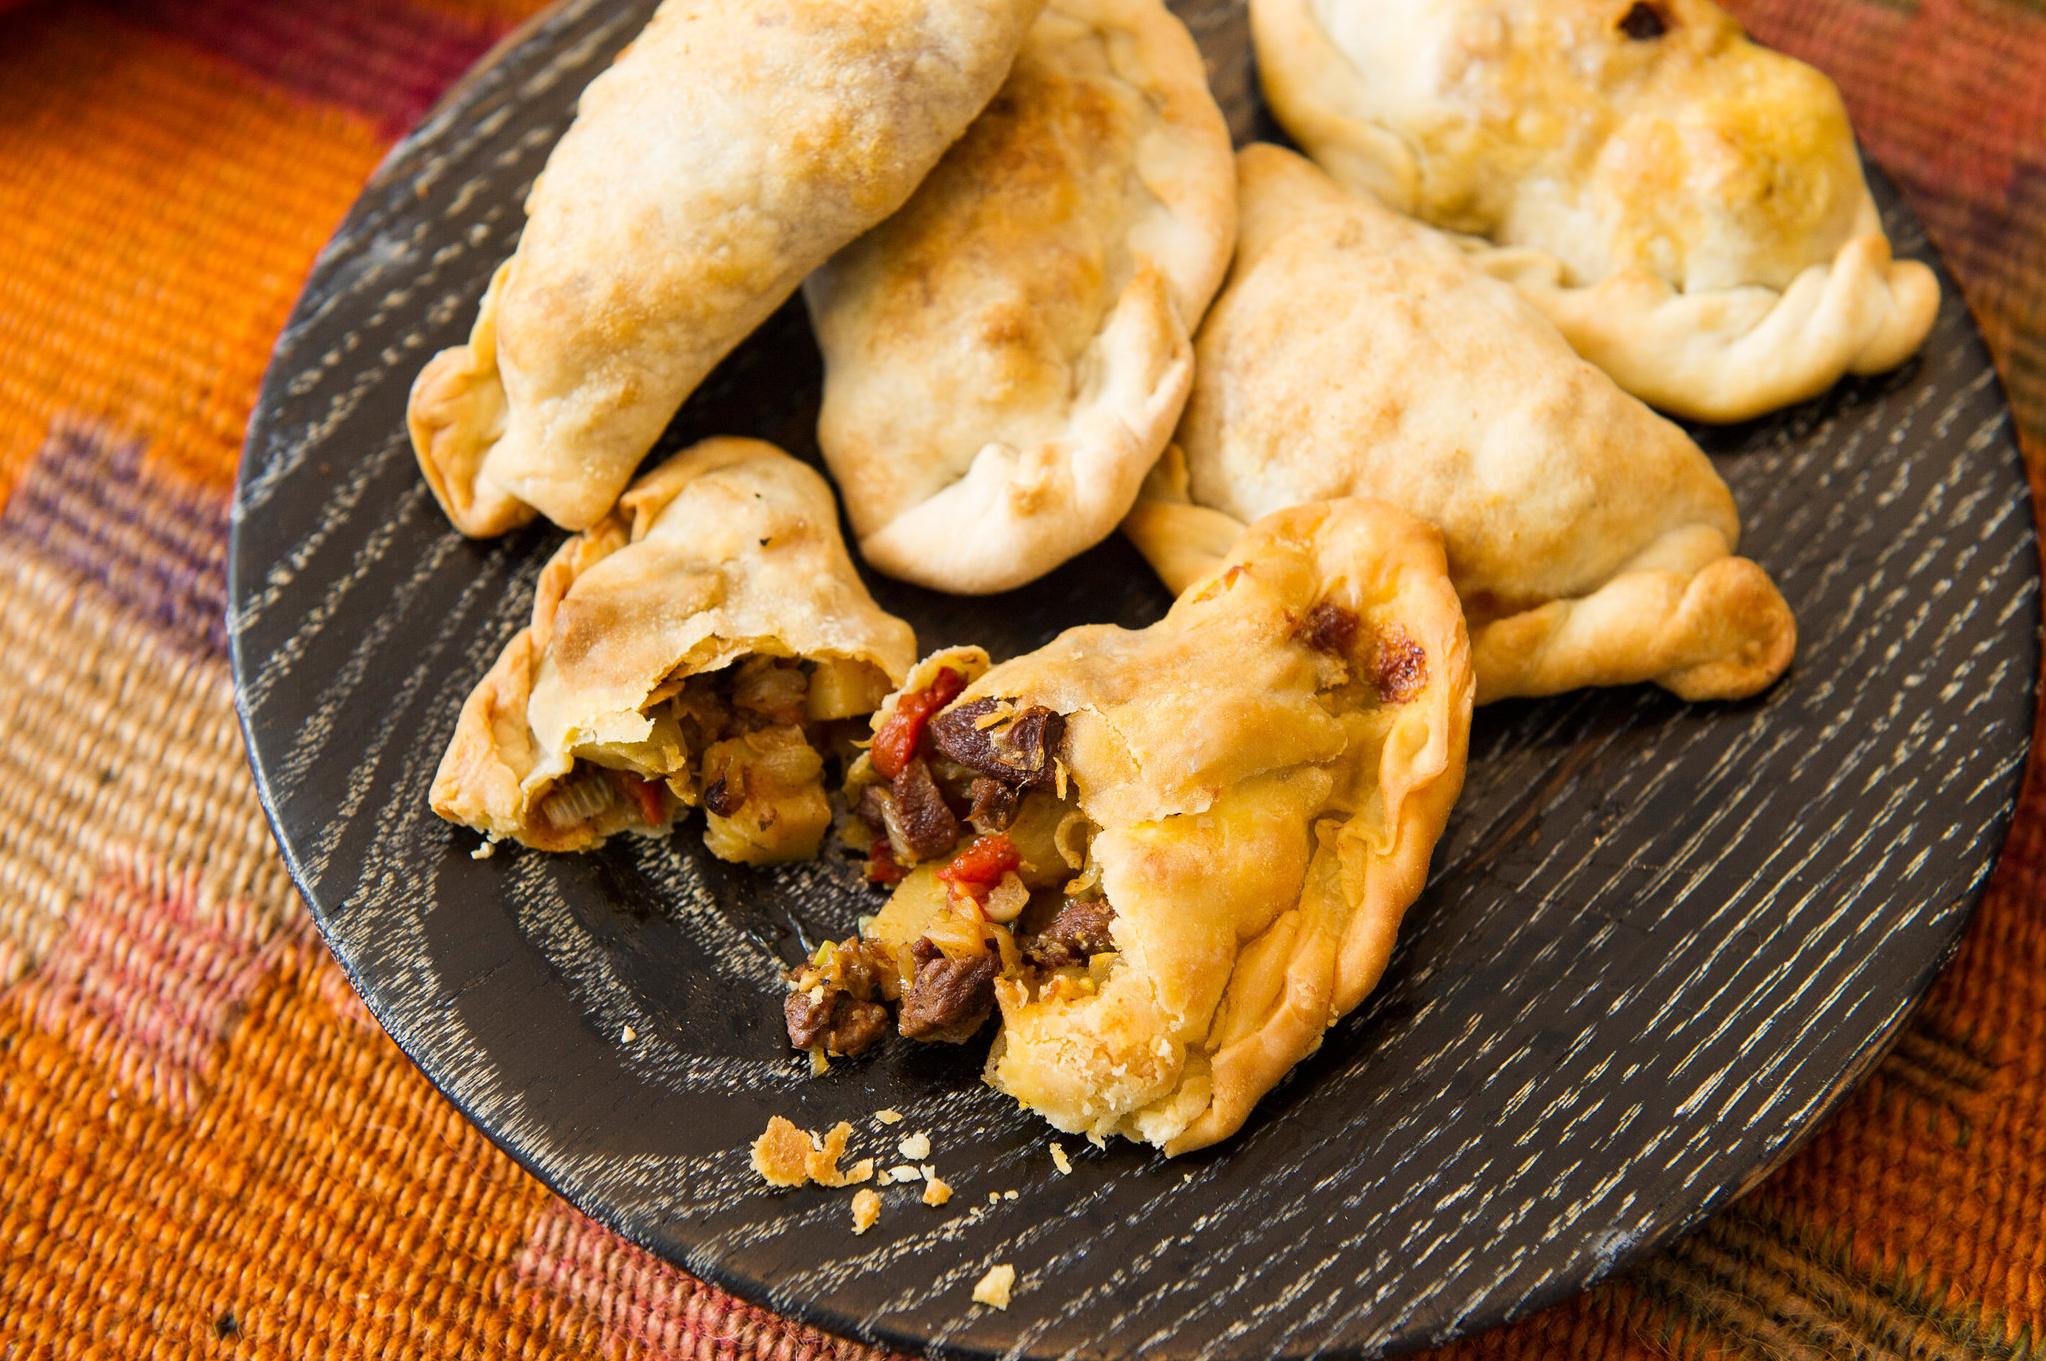  Empanadas are a classic South American dish, and this meat-filled recipe doesn't disappoint.